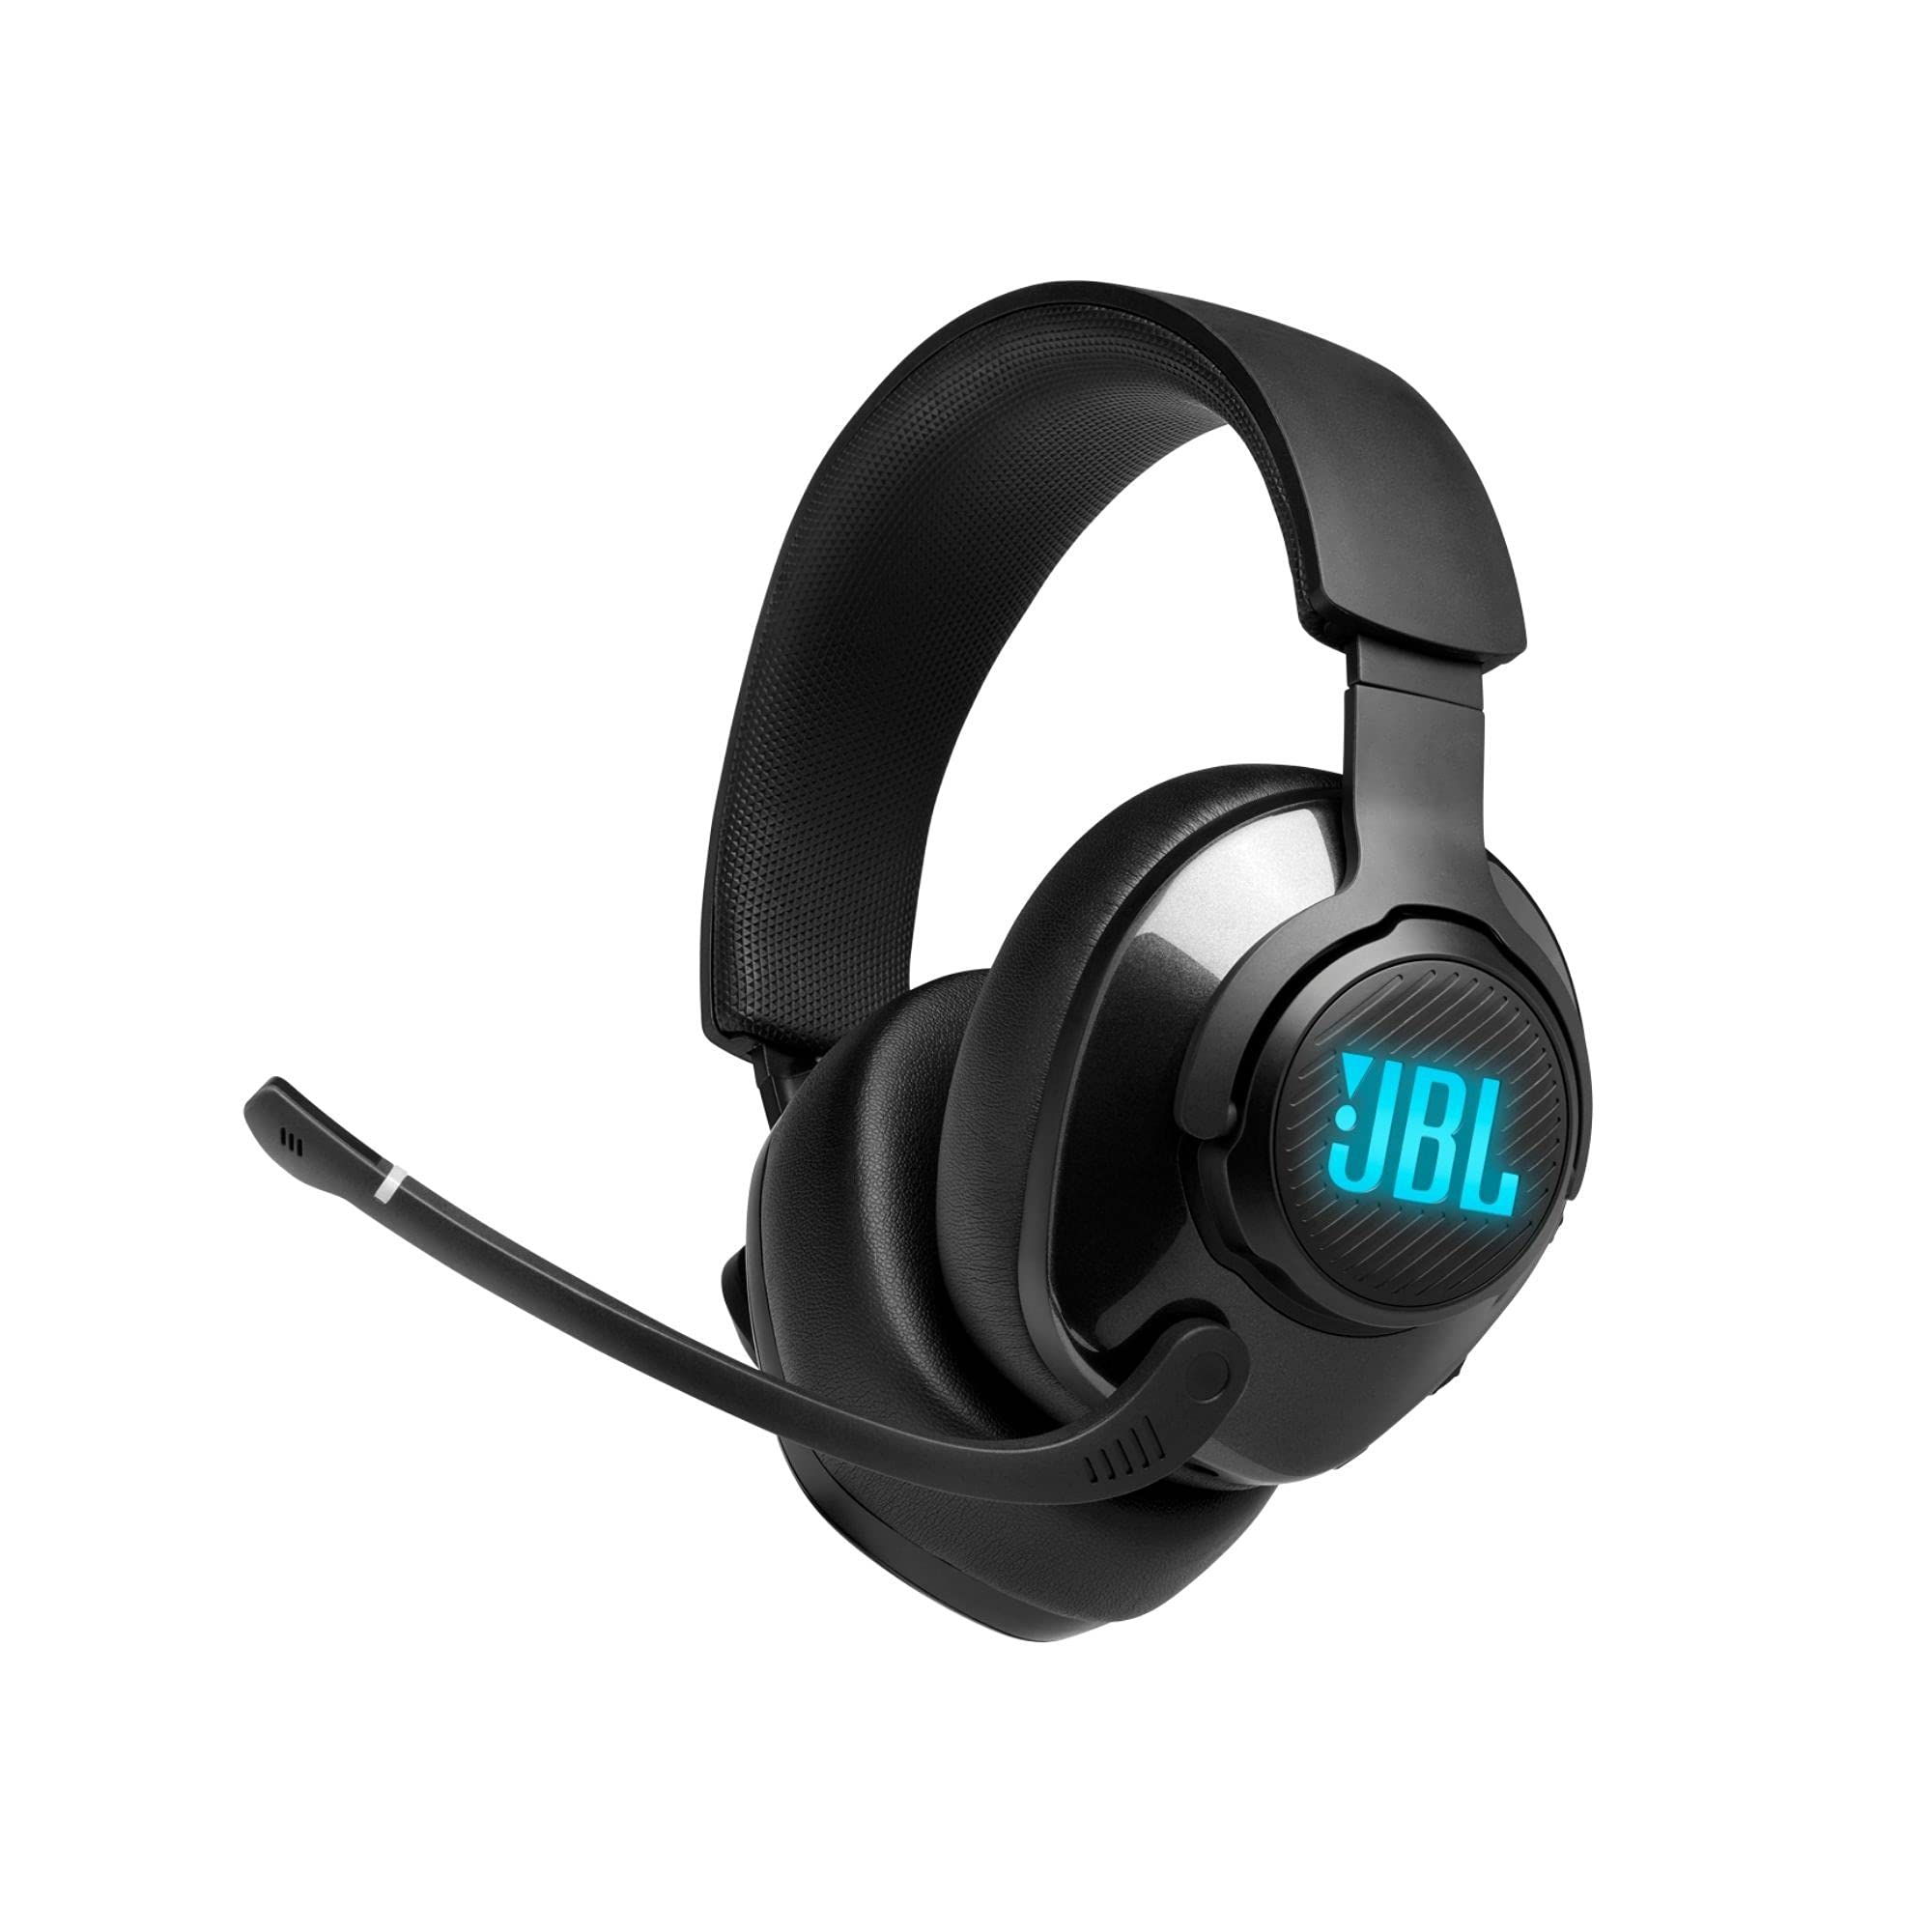 JBL Quantum 400 - Wired Over-Ear Gaming Headphones with USB and Game-Chat Balance Dial - Black